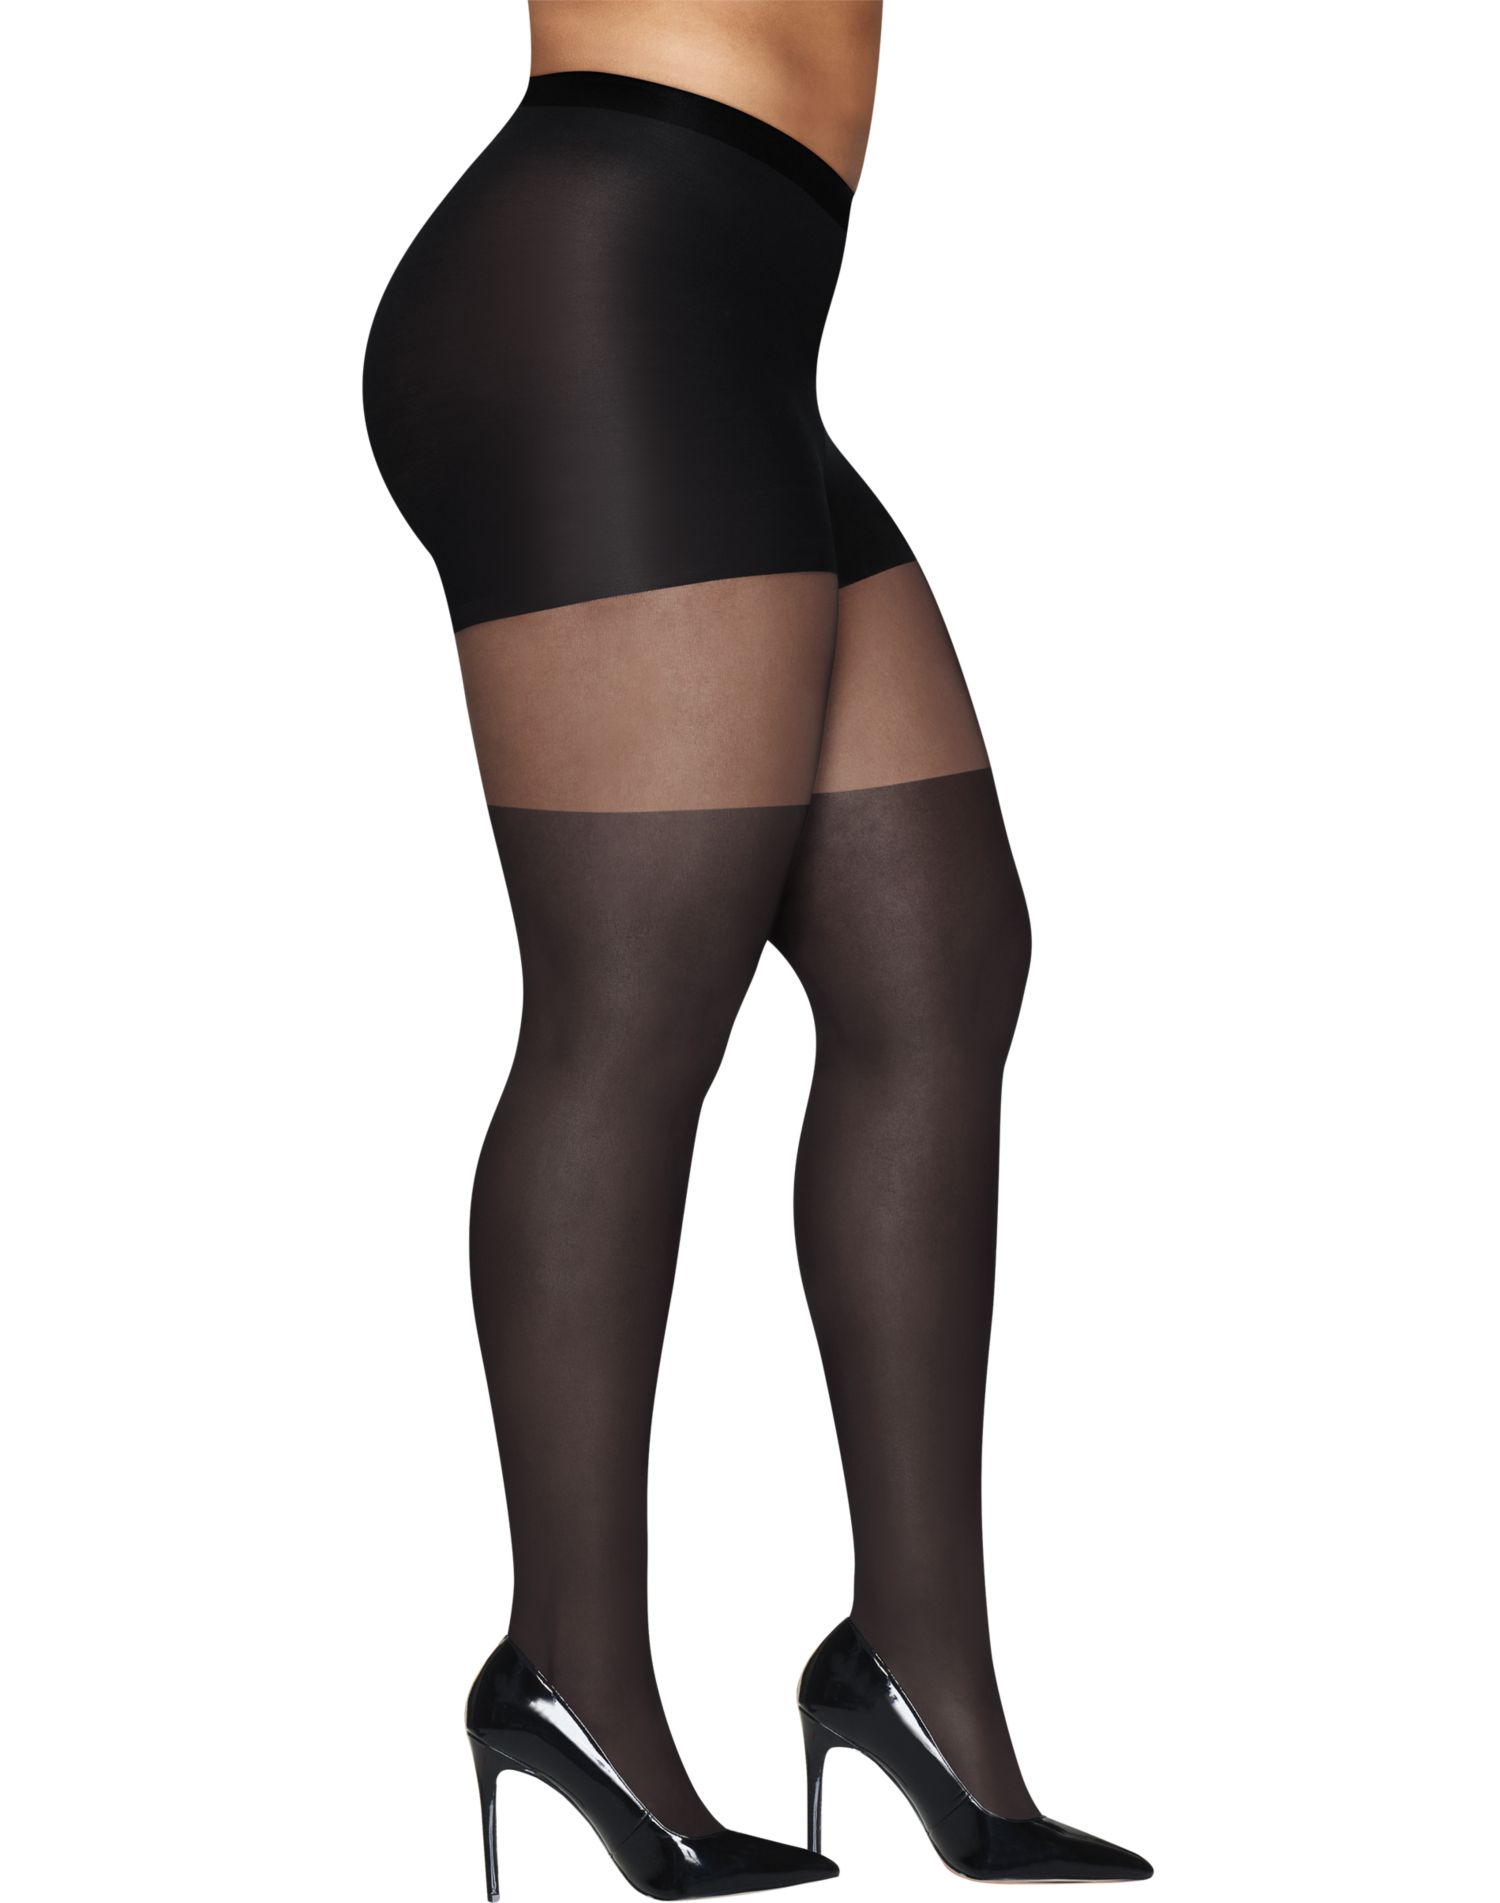 Hanes Womens Curves Illusion Thigh Highs - Apparel Direct Distributor